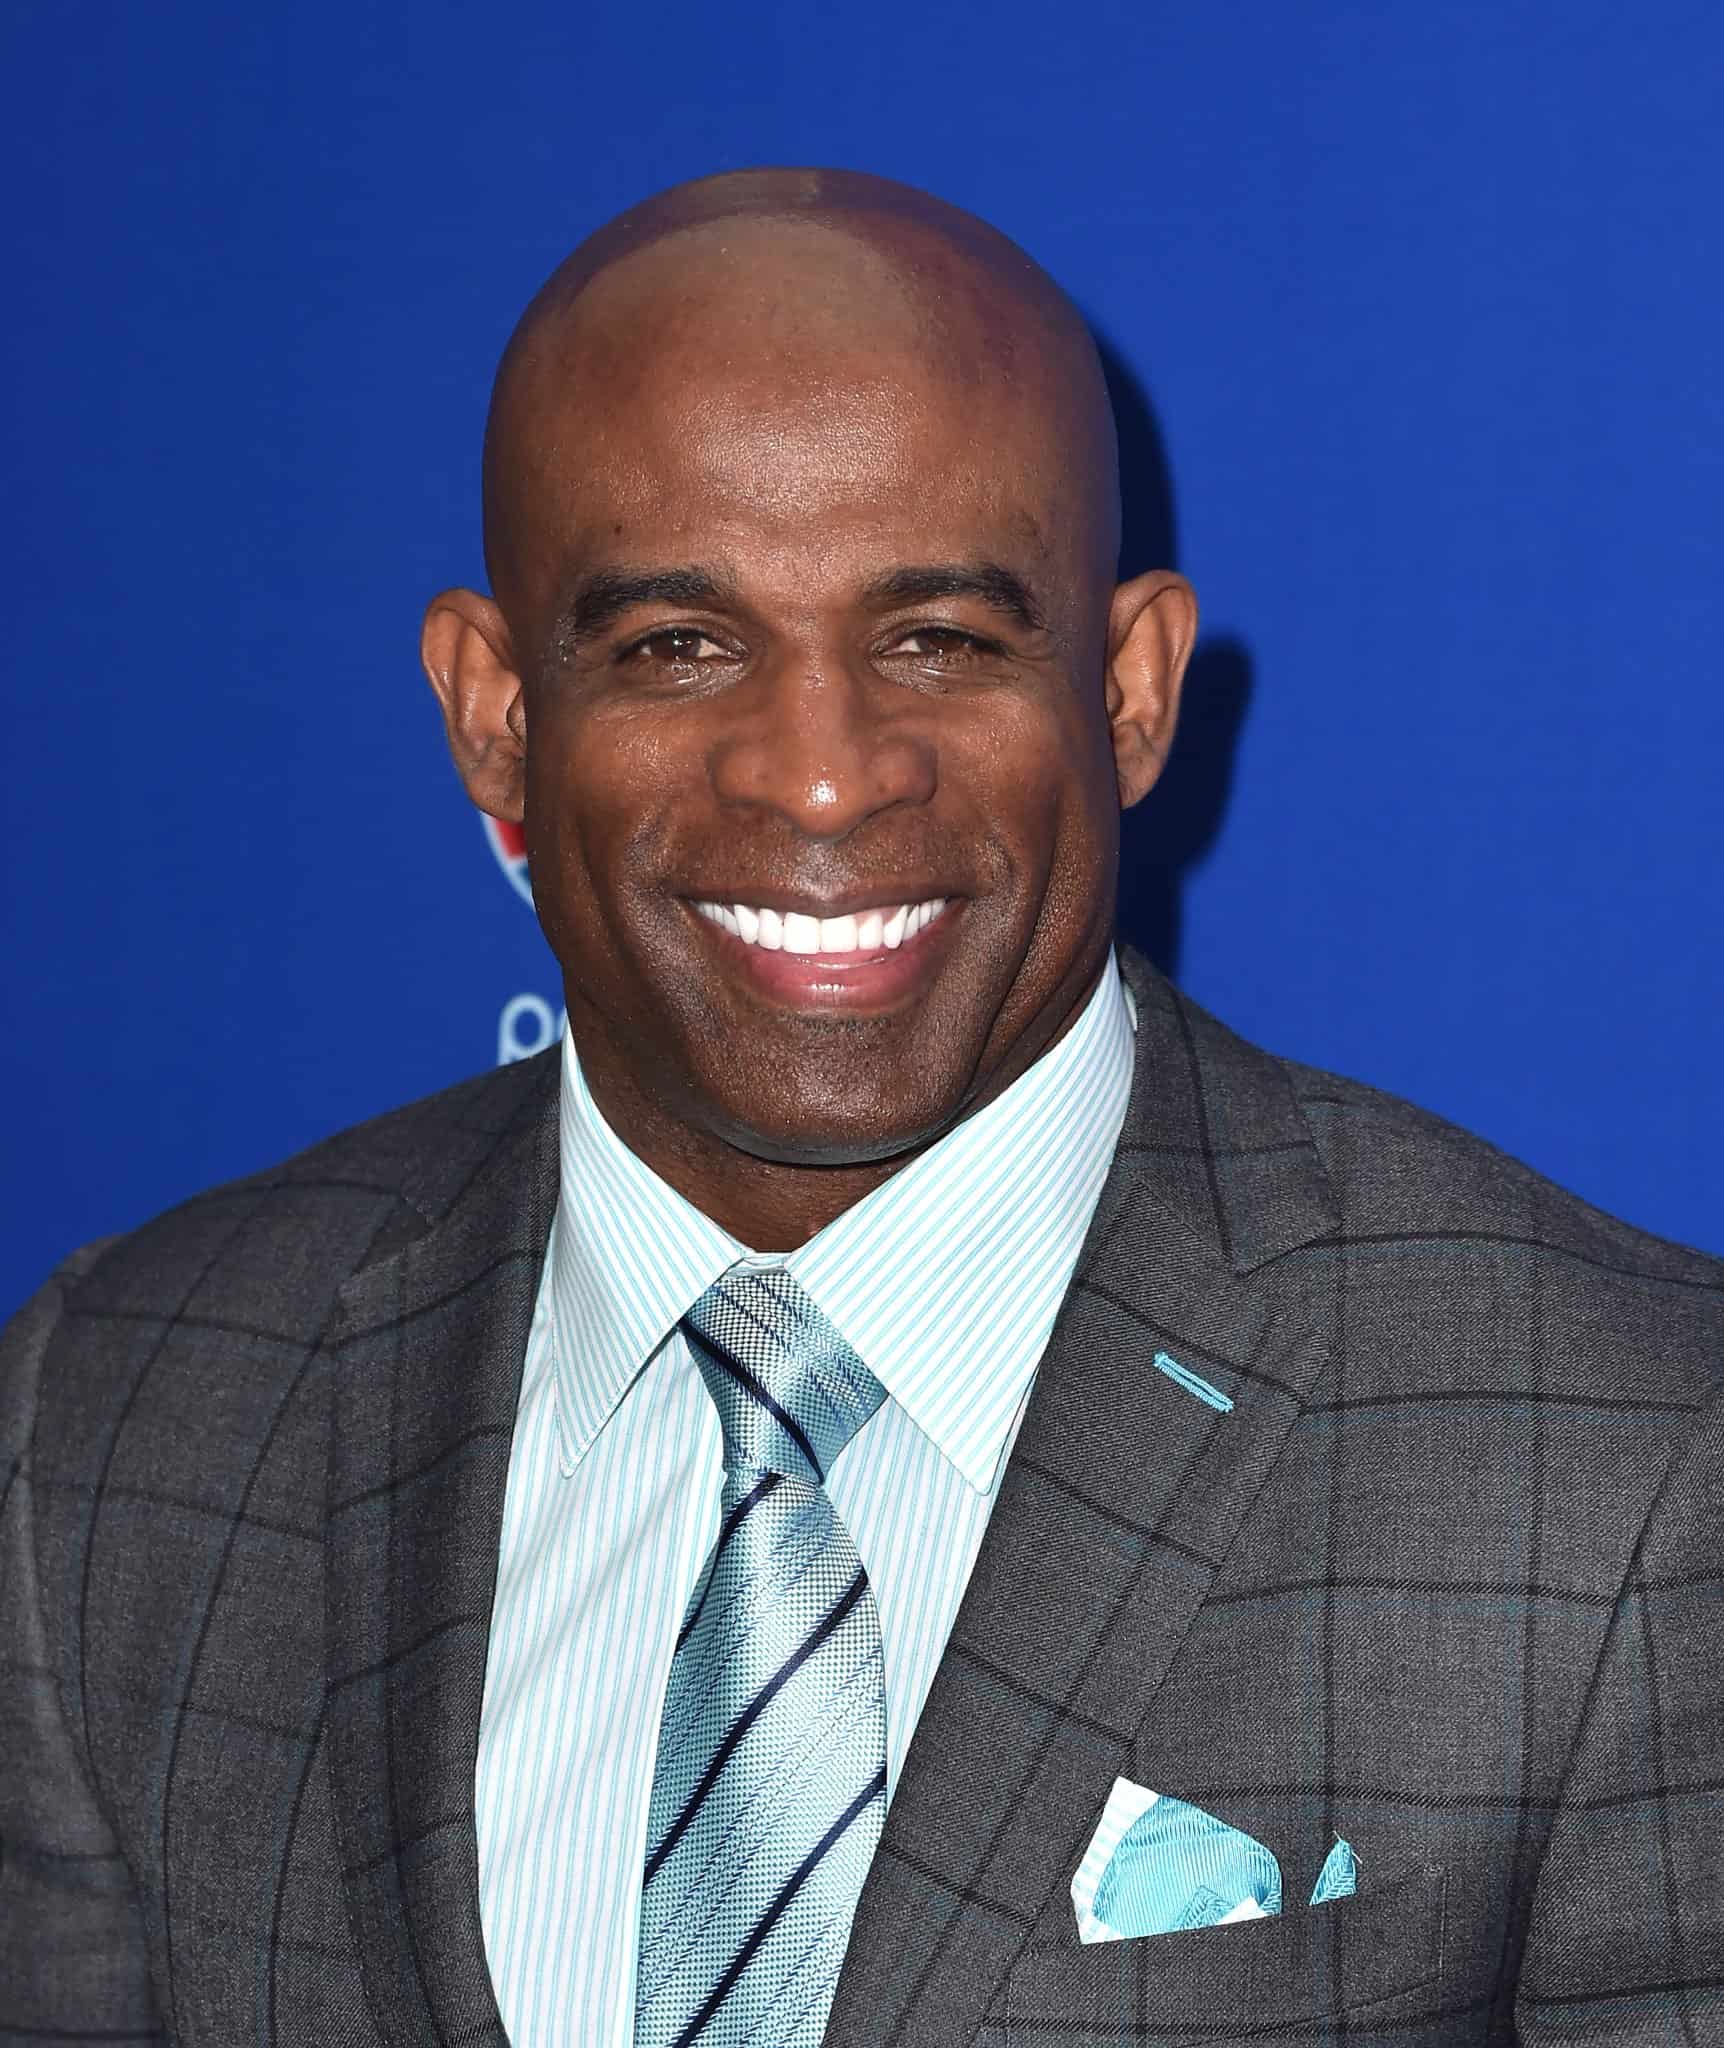 Deion Sanders Becomes The New Head Football Coach At Jackson State ...